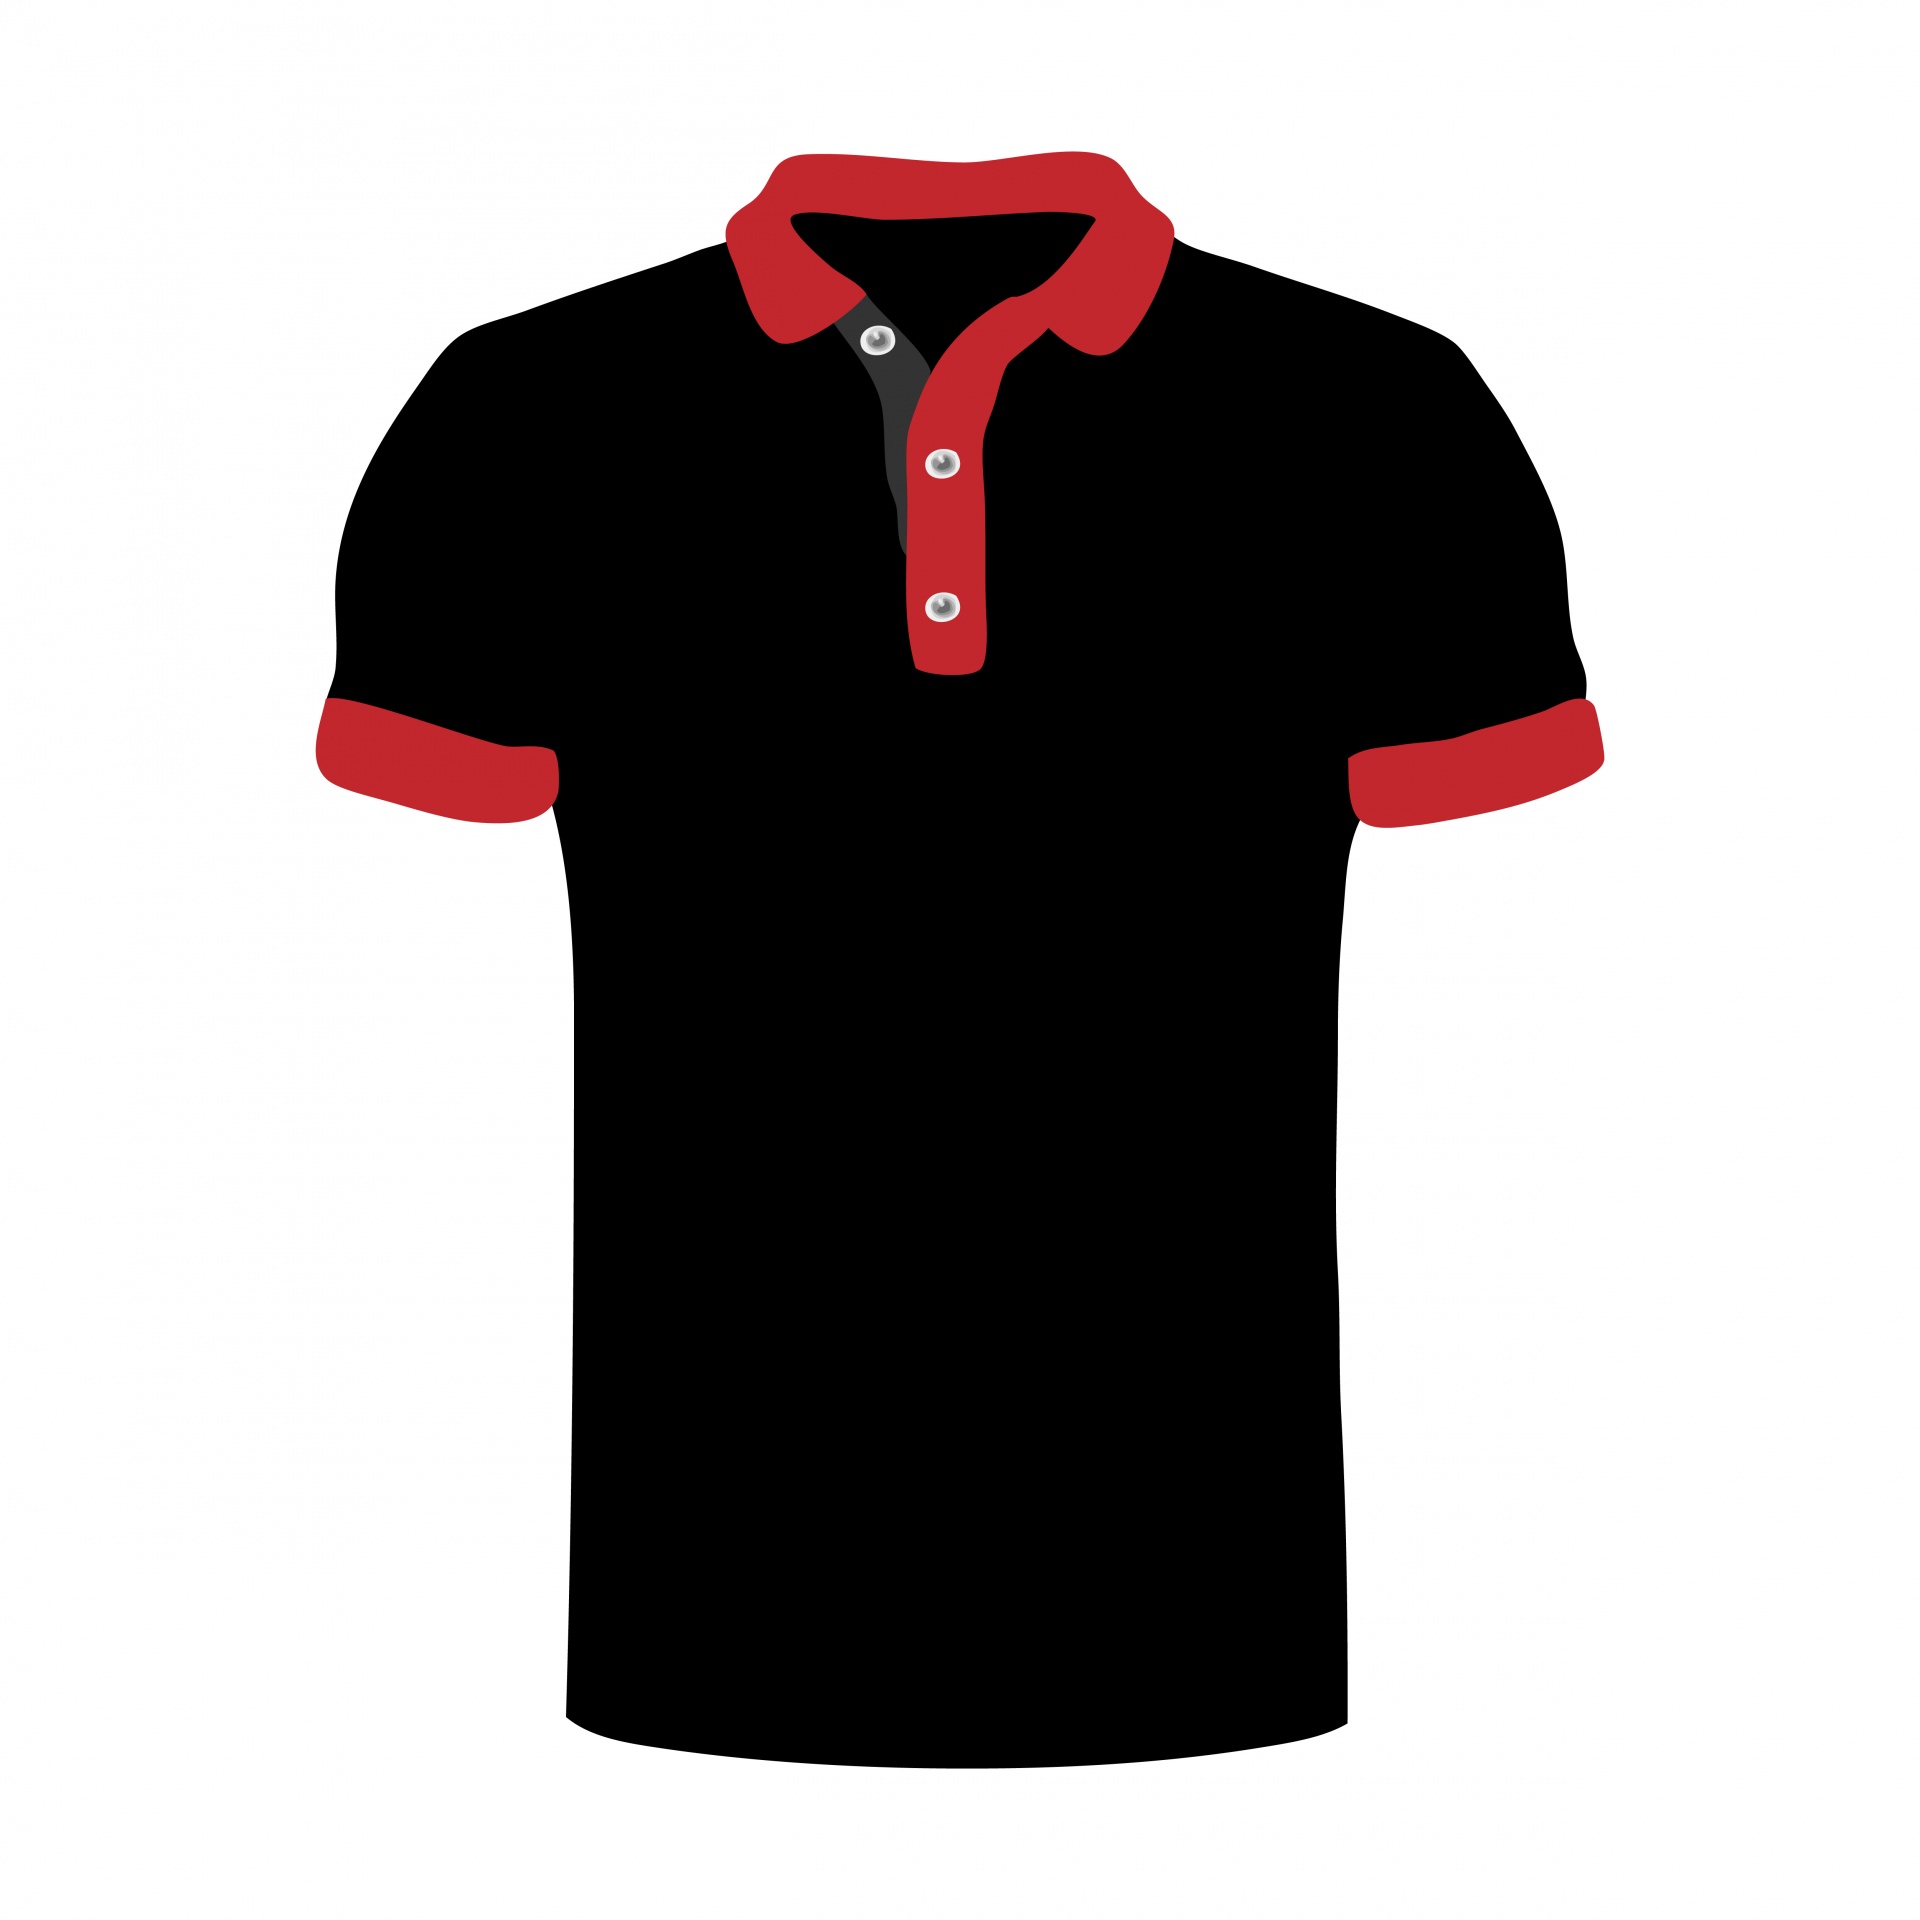 Download Free Photo Of T Shirtpolopolo T Shirtblackred From 2401